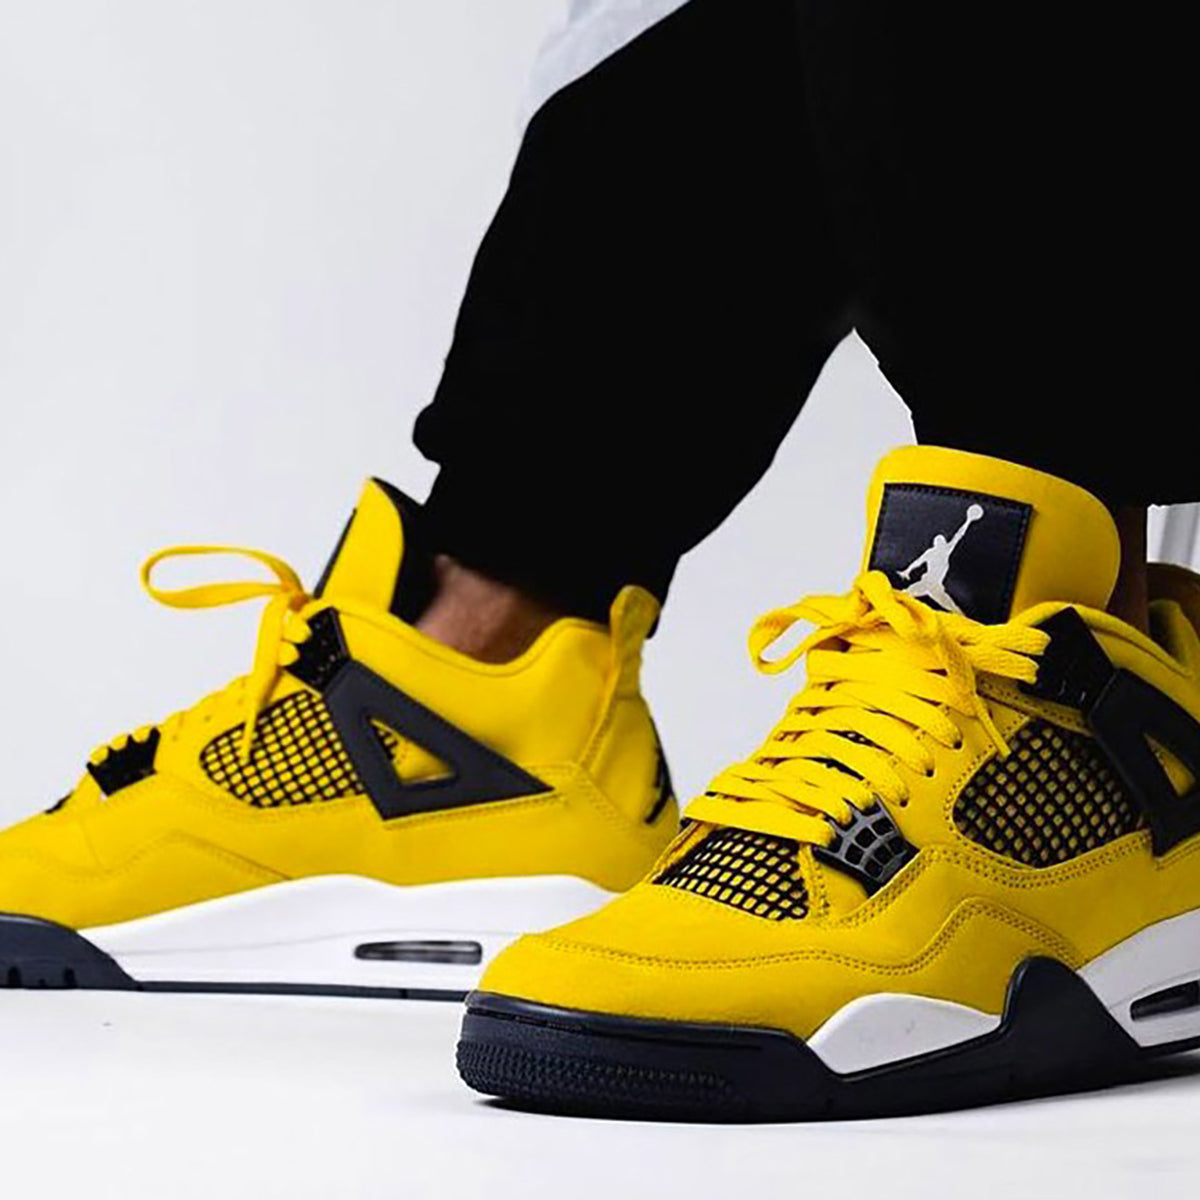 Air Jordan 4 'Lightning' to Release in Family Sizing This Month